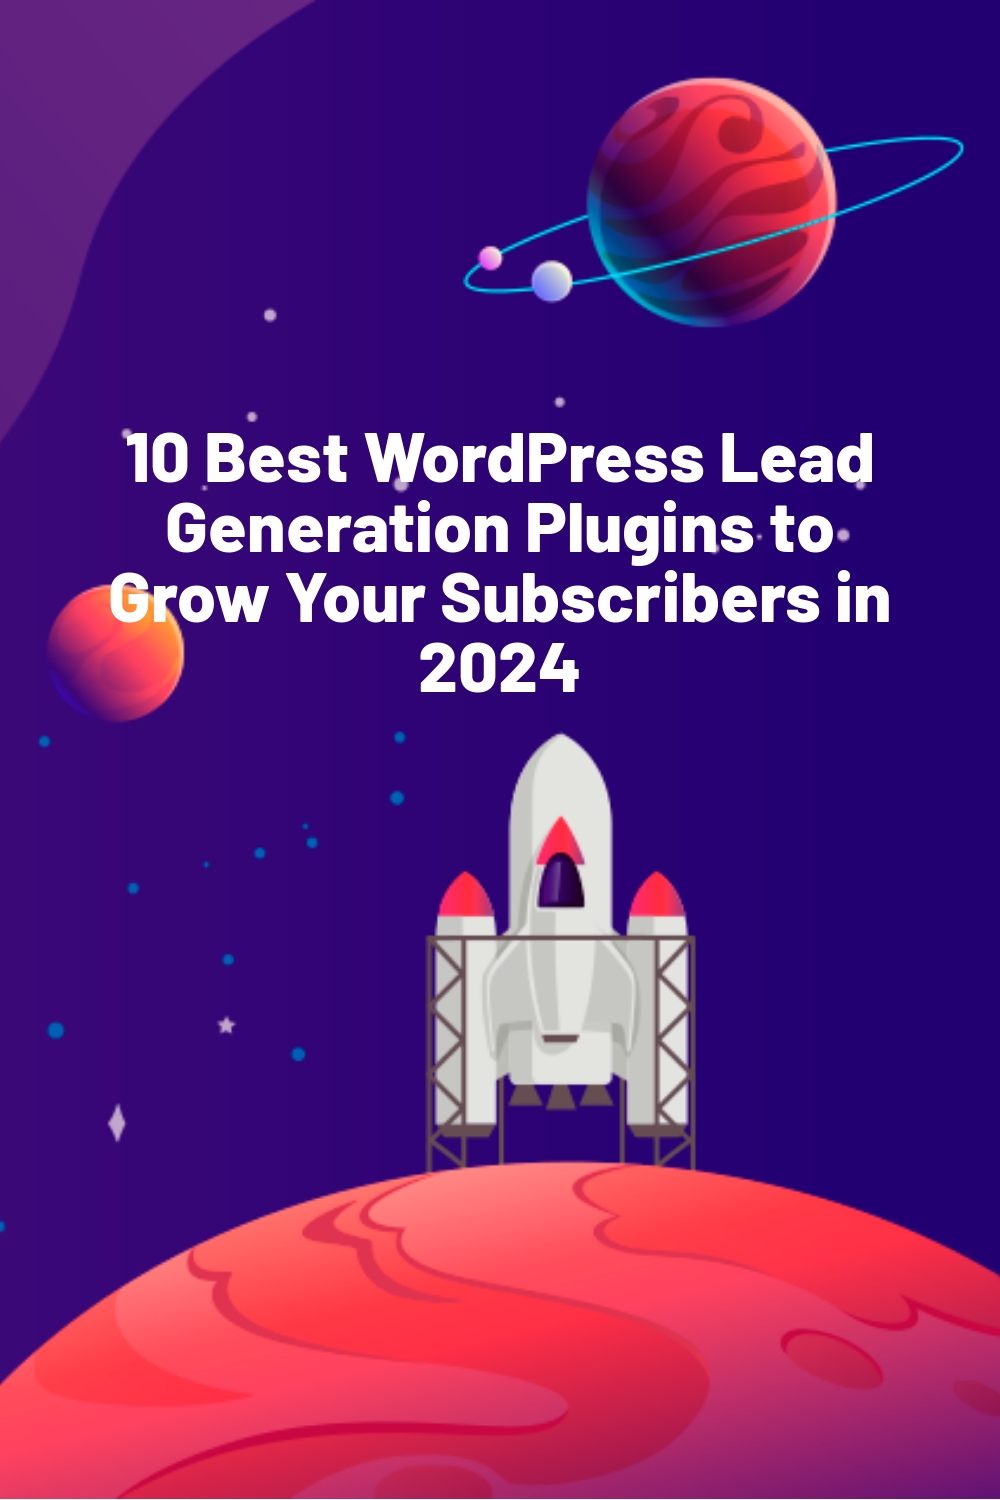 10 Best WordPress Lead Generation Plugins to Grow Your Subscribers in 2024